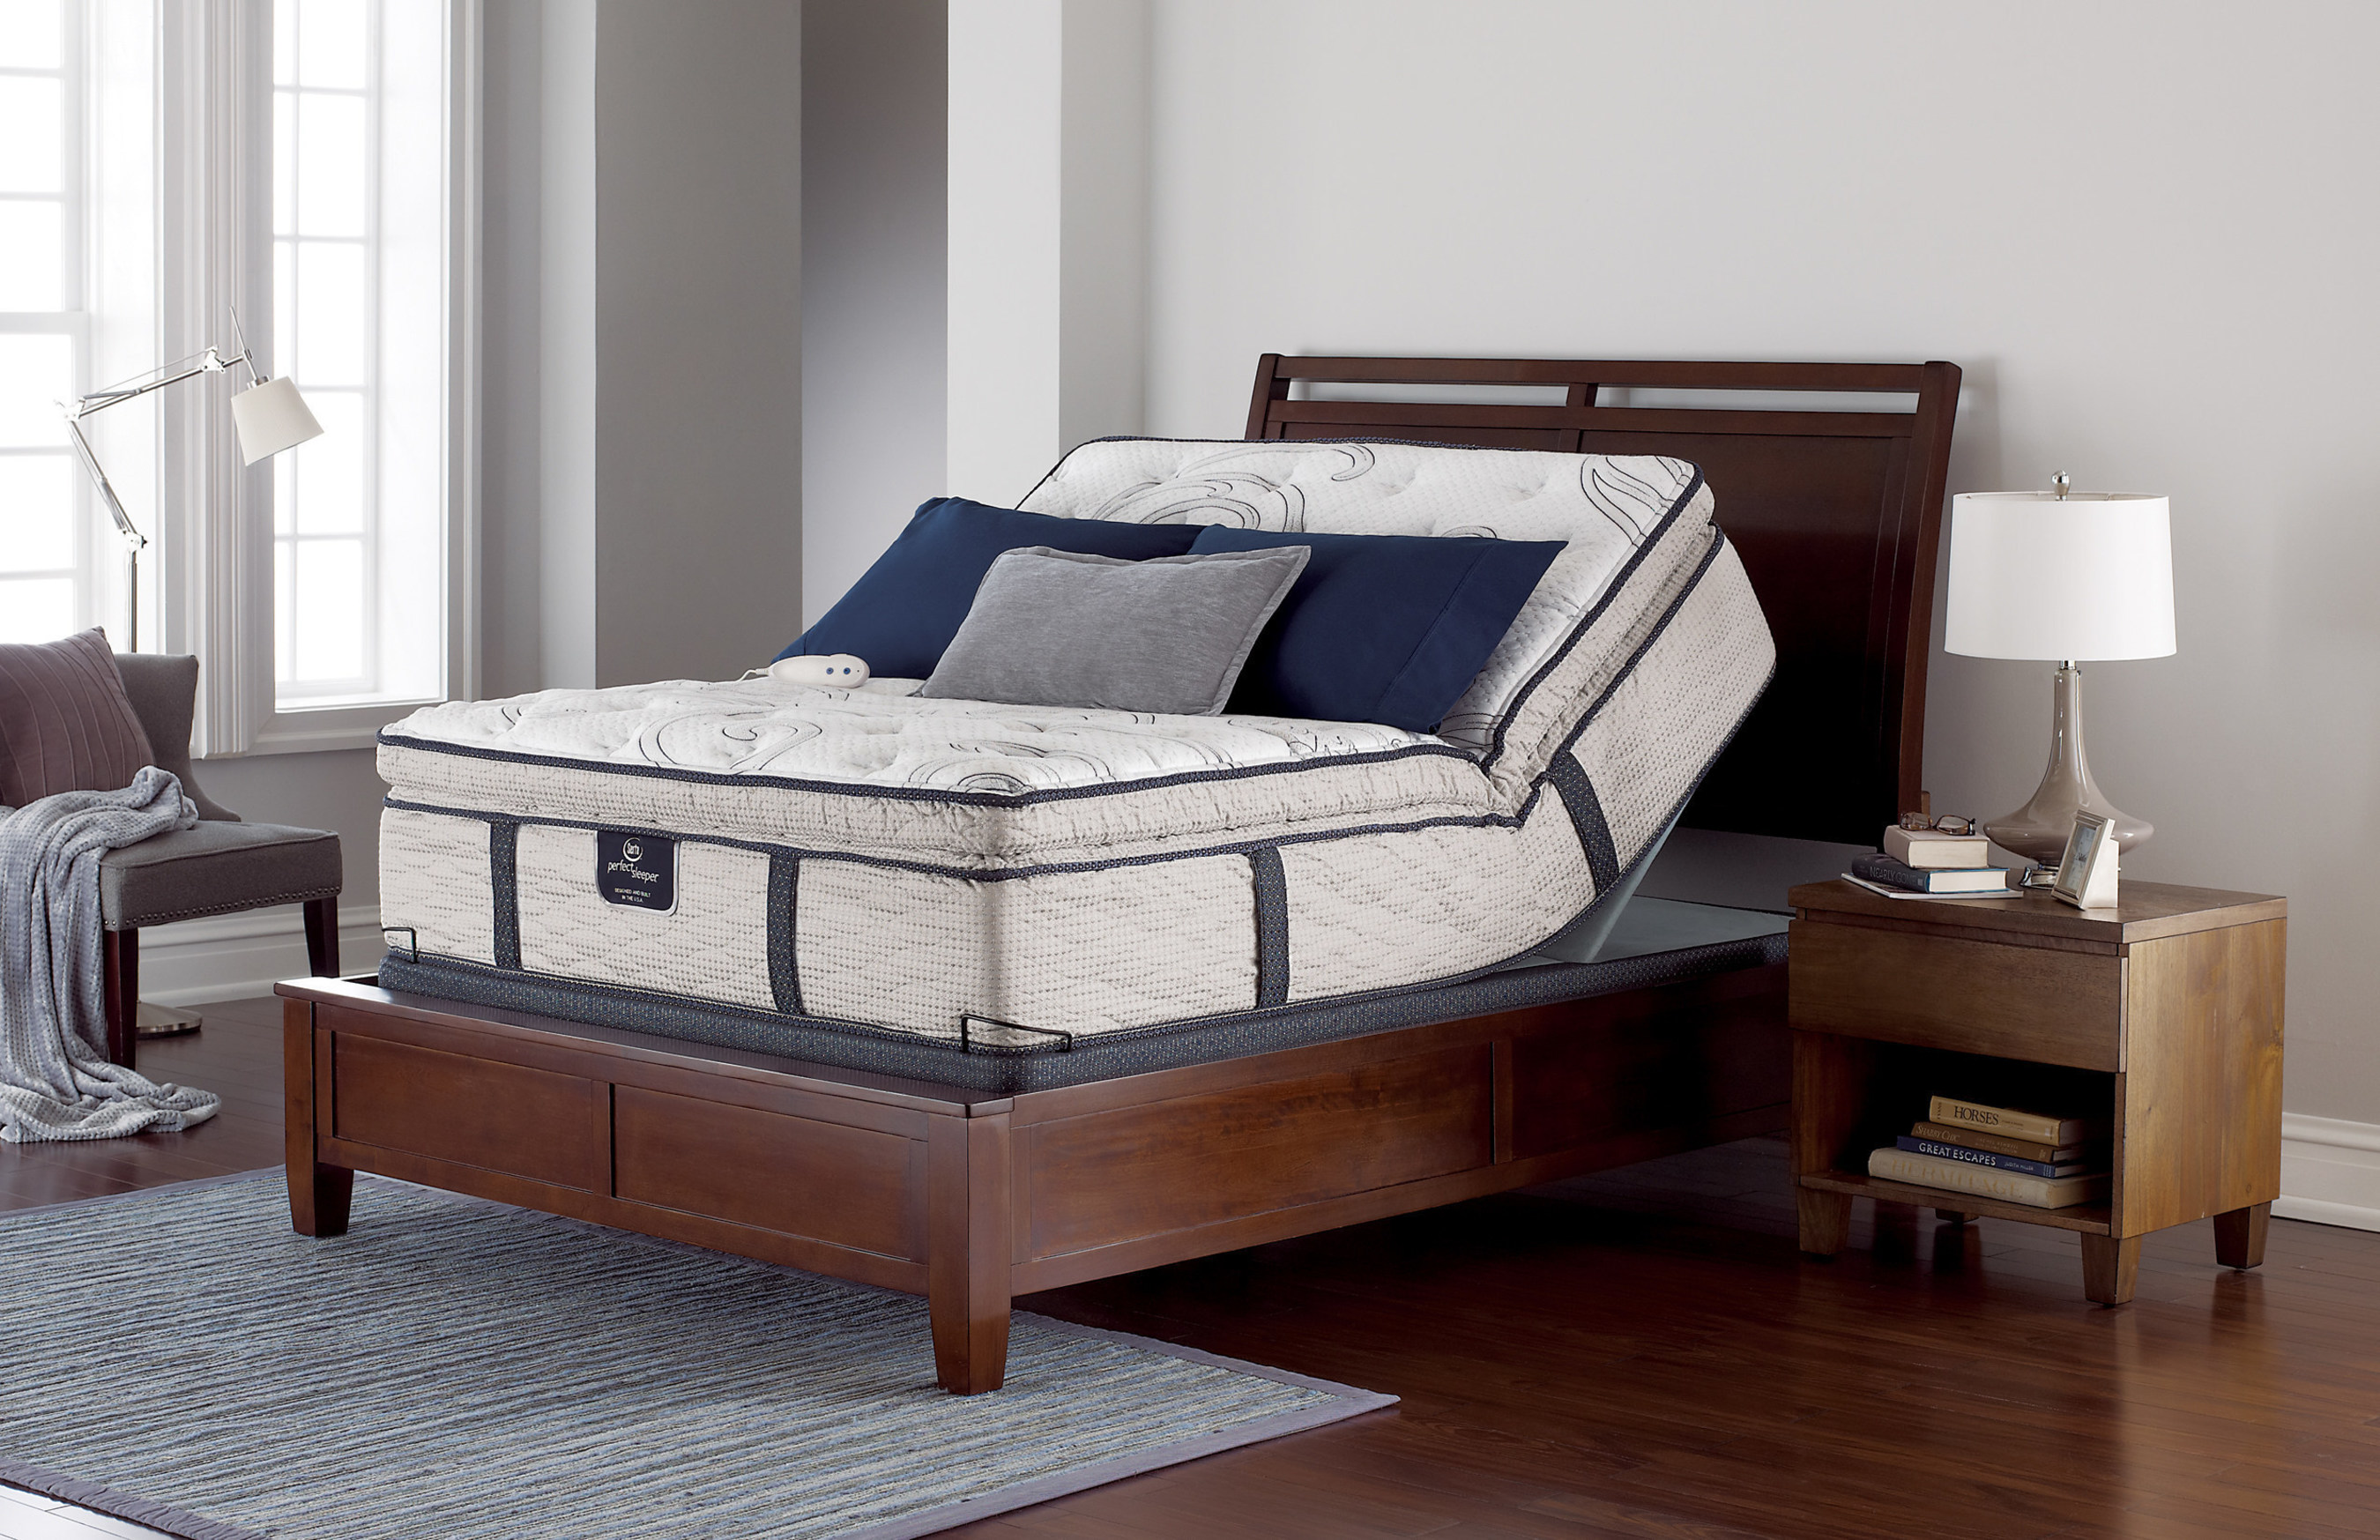 Serta set out to understand how getting a more comfortable sleep with its Perfect Sleeper mattress collection can lead to improved interpersonal relationships